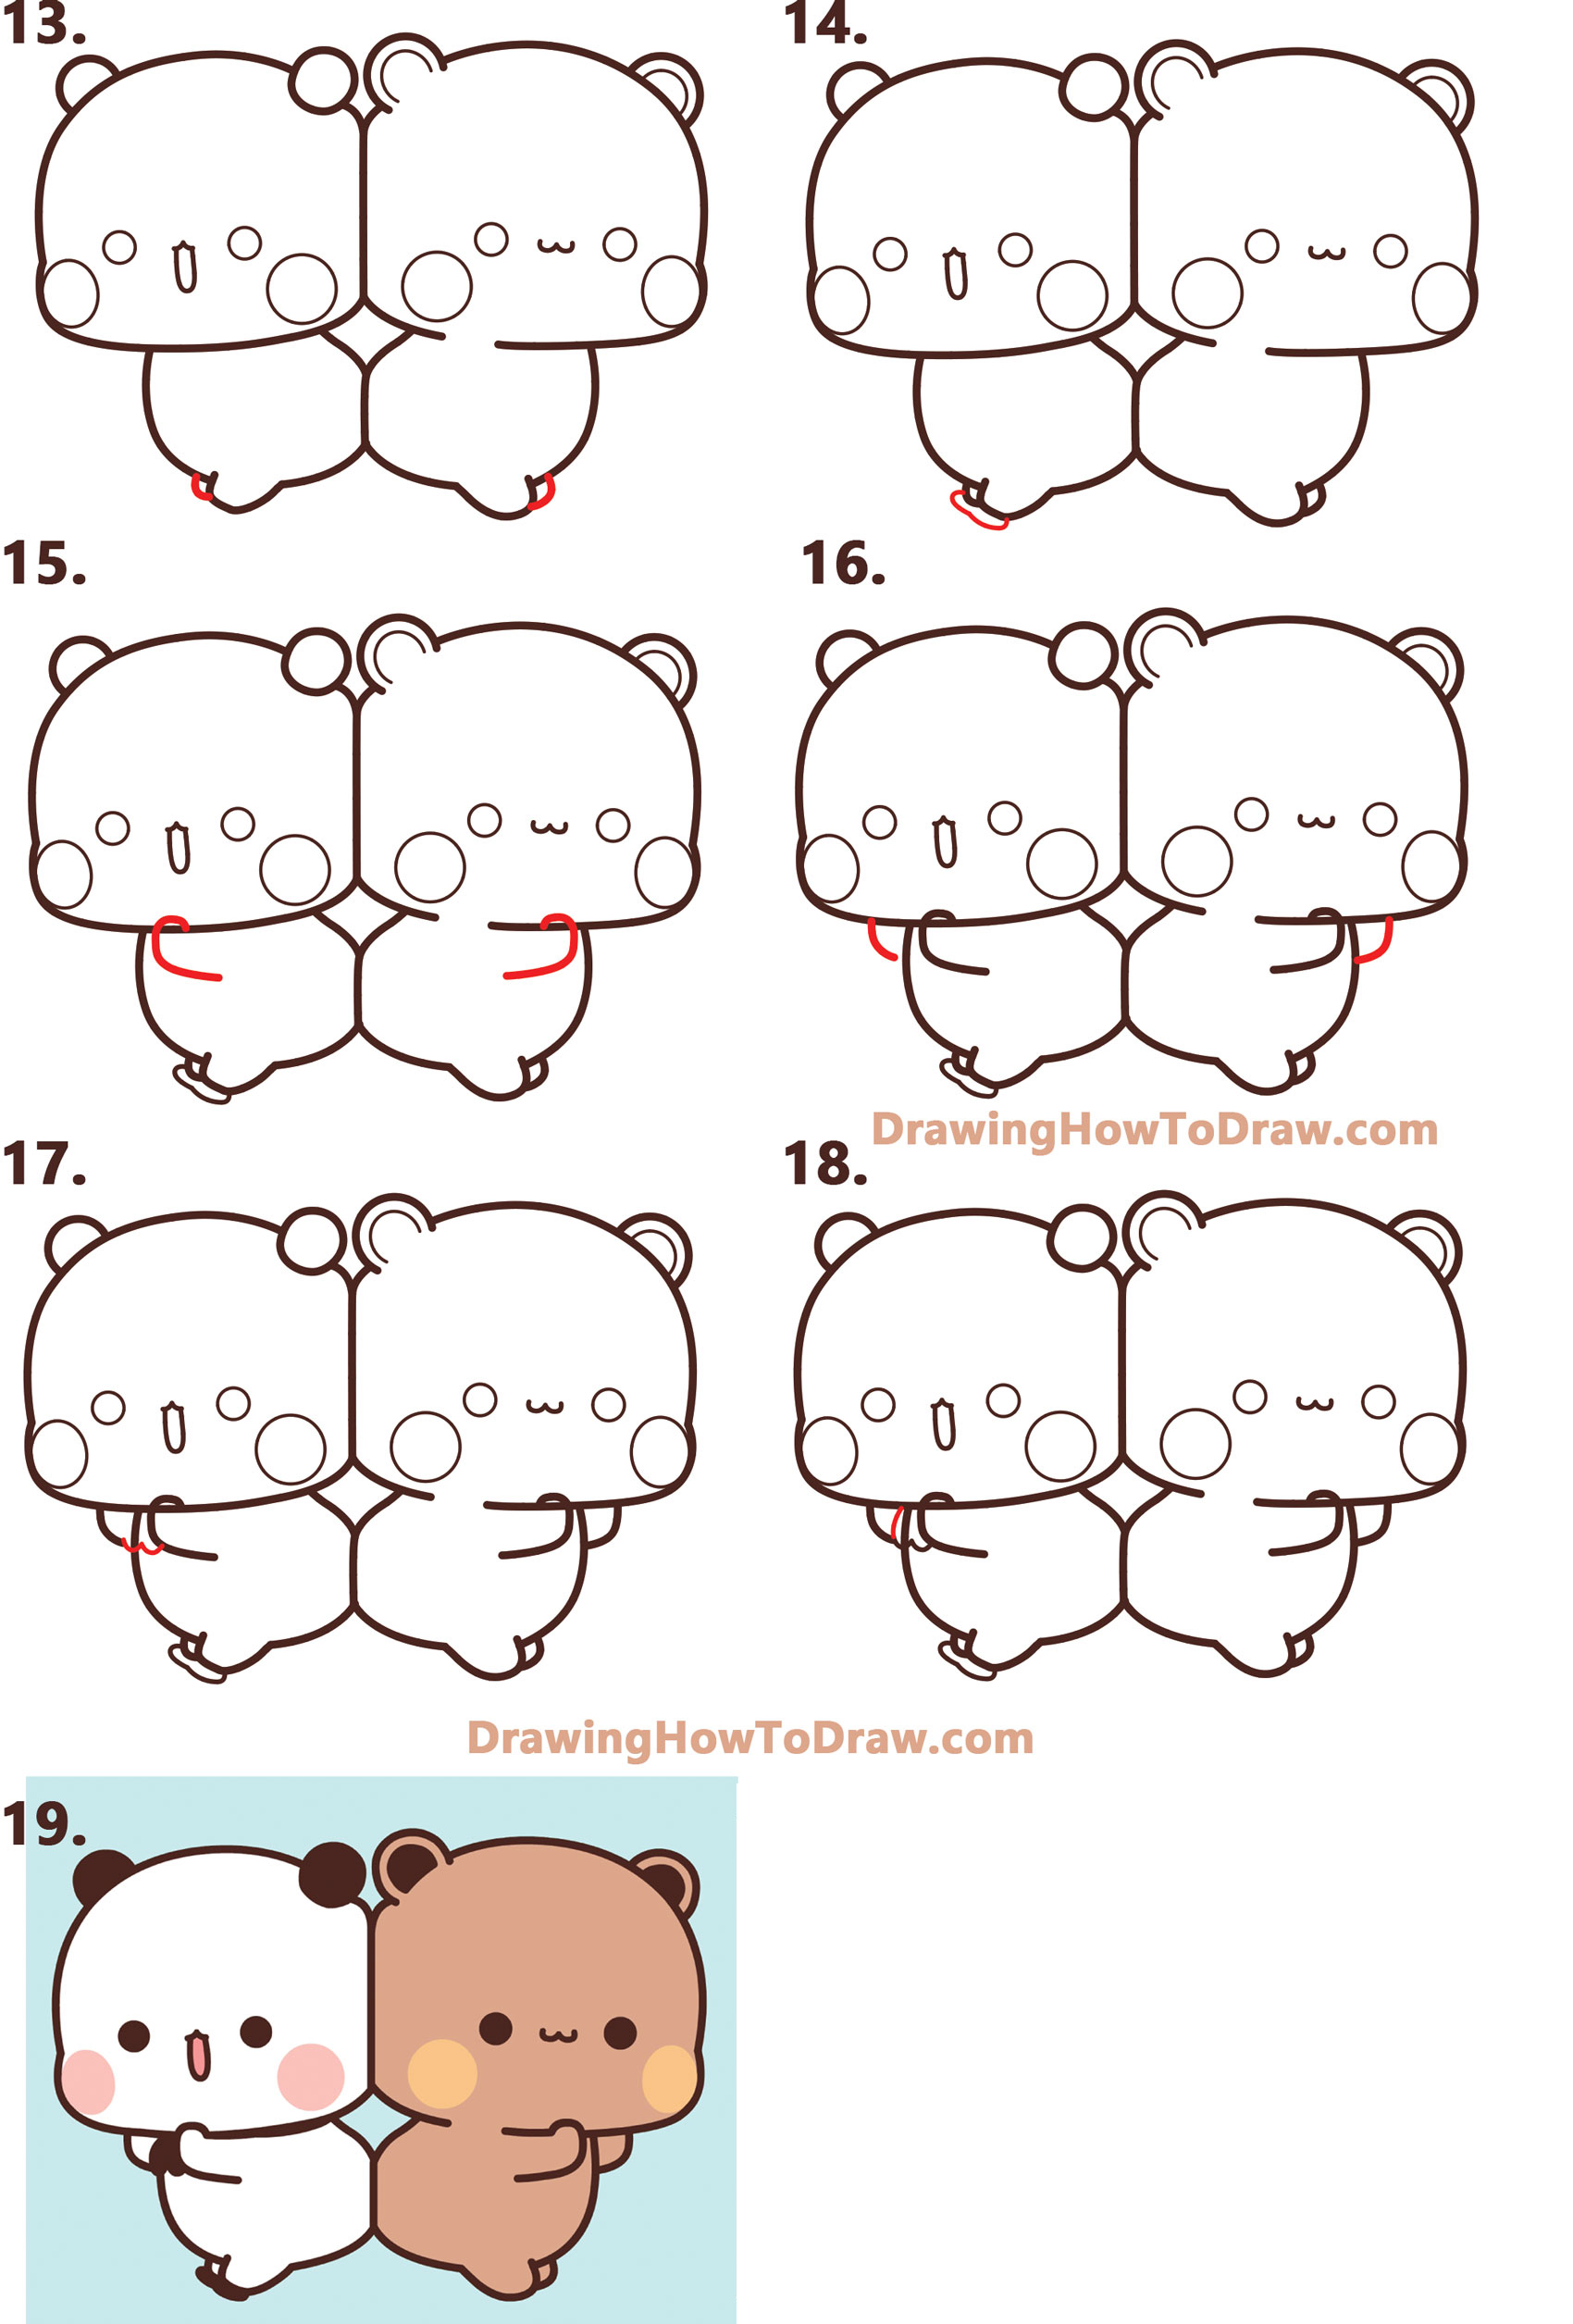 How to Draw Bear and Panda from Peach Goma (Kawaii) Easy Step by Step Drawing Tutorial